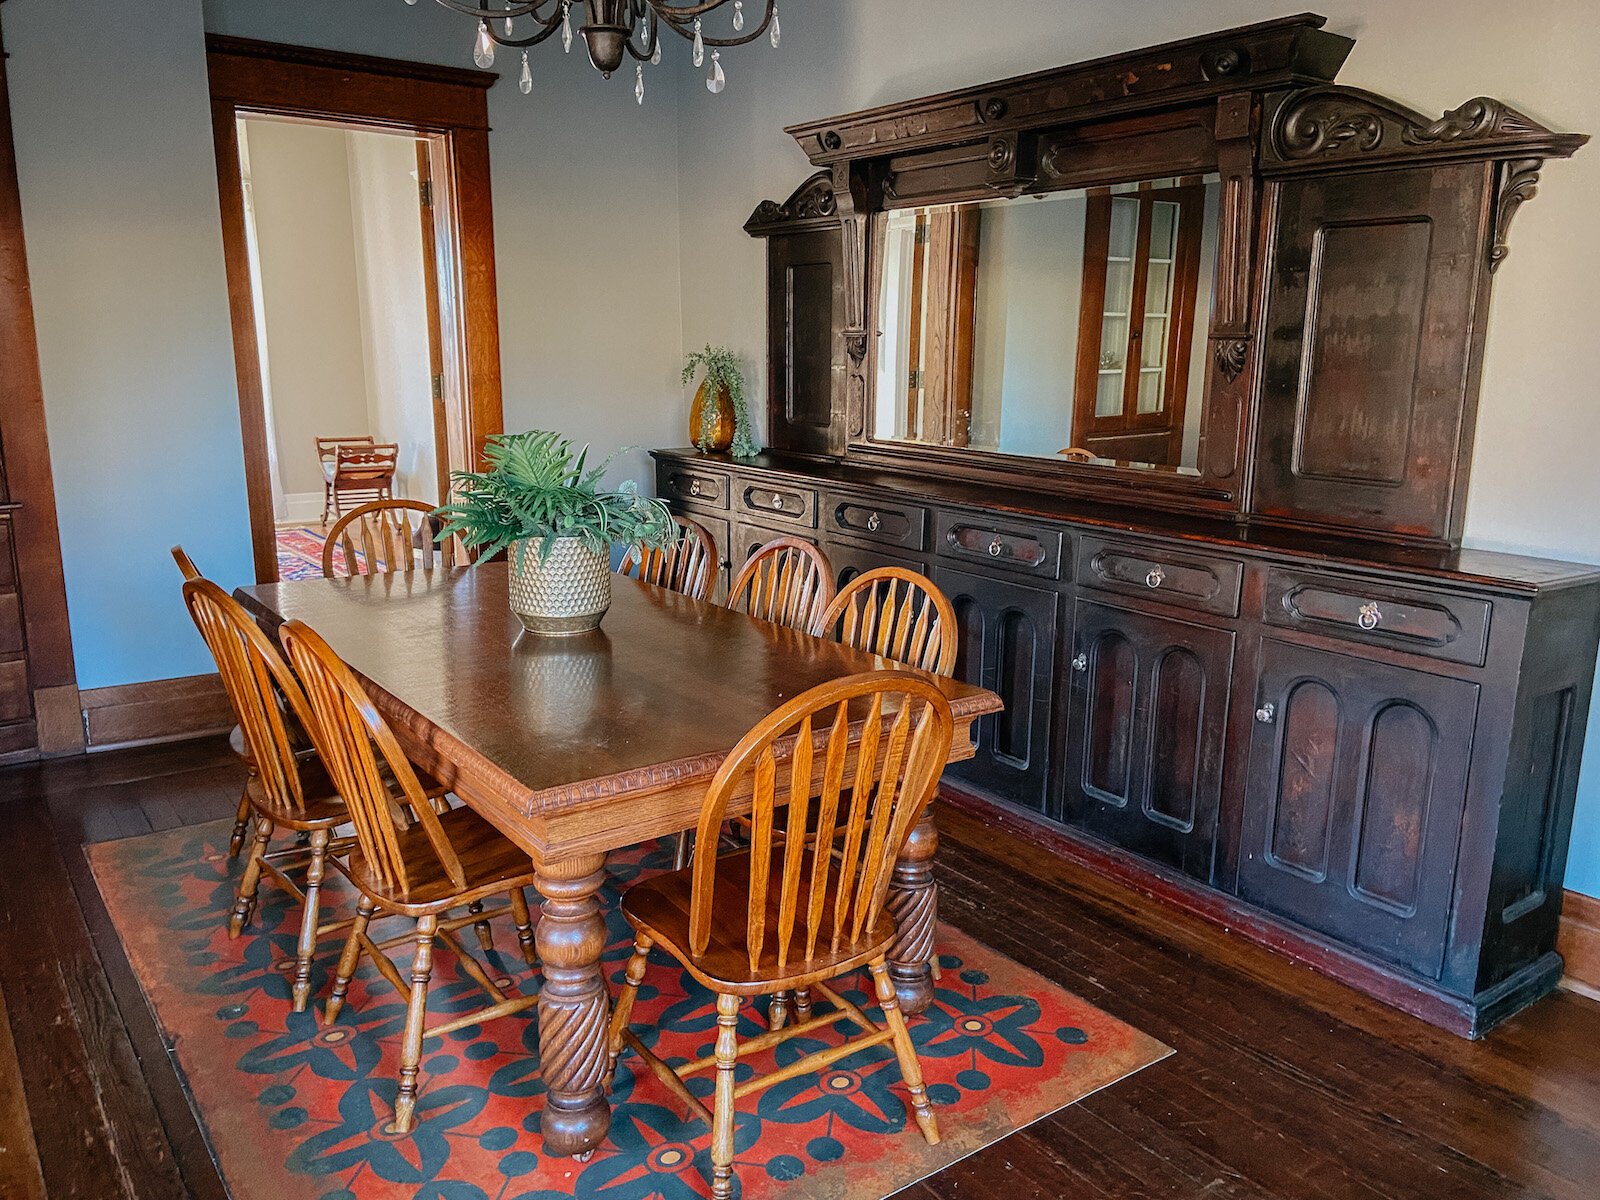 A dining room table at the Clarkson House.